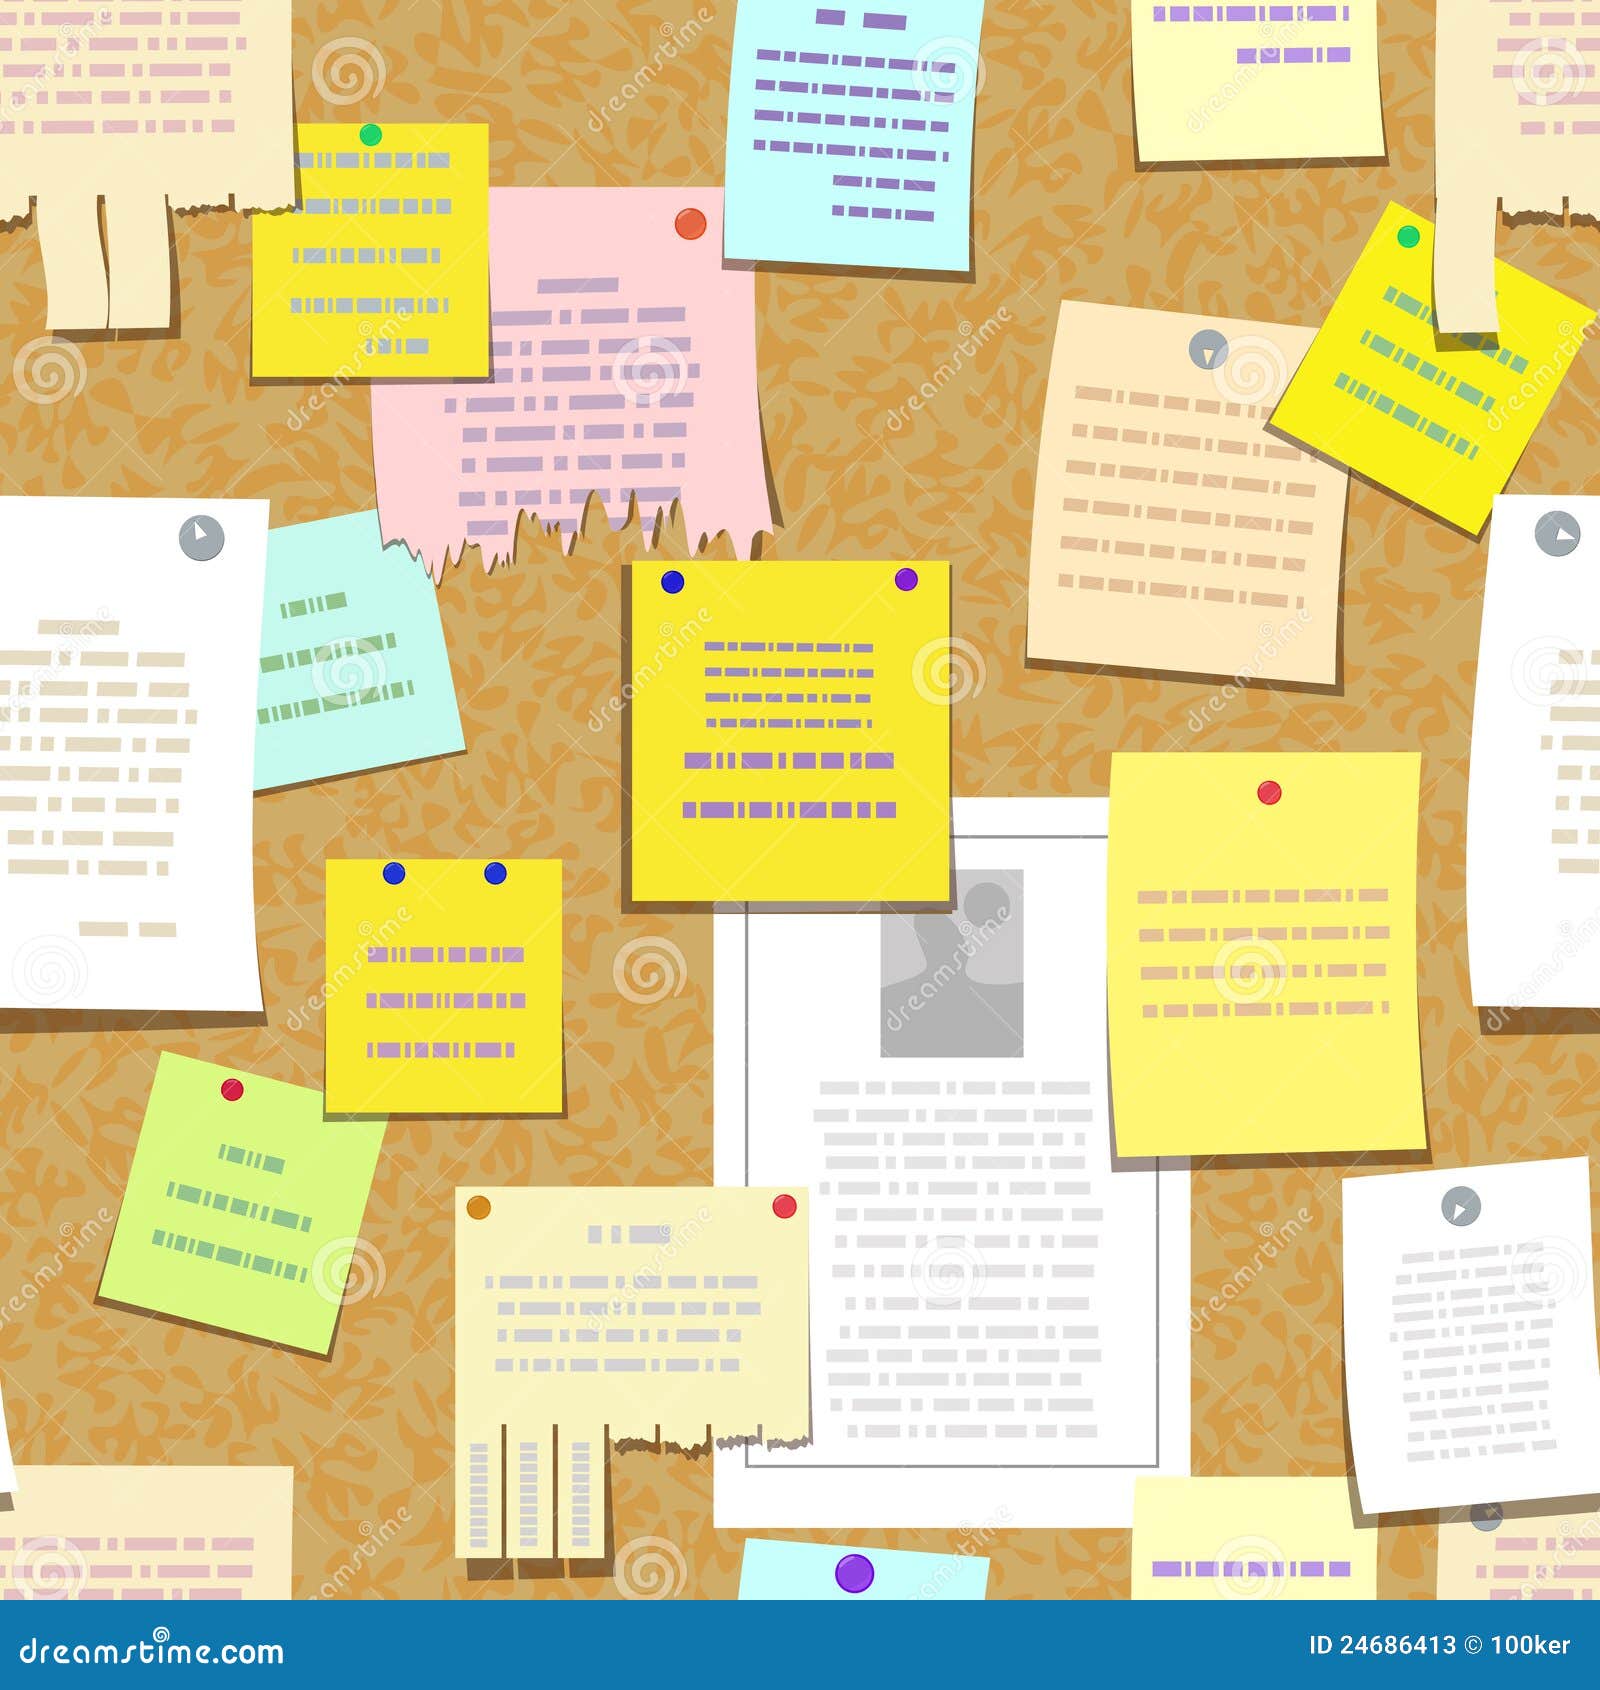 seamless cork bulletin board with notes, advertise